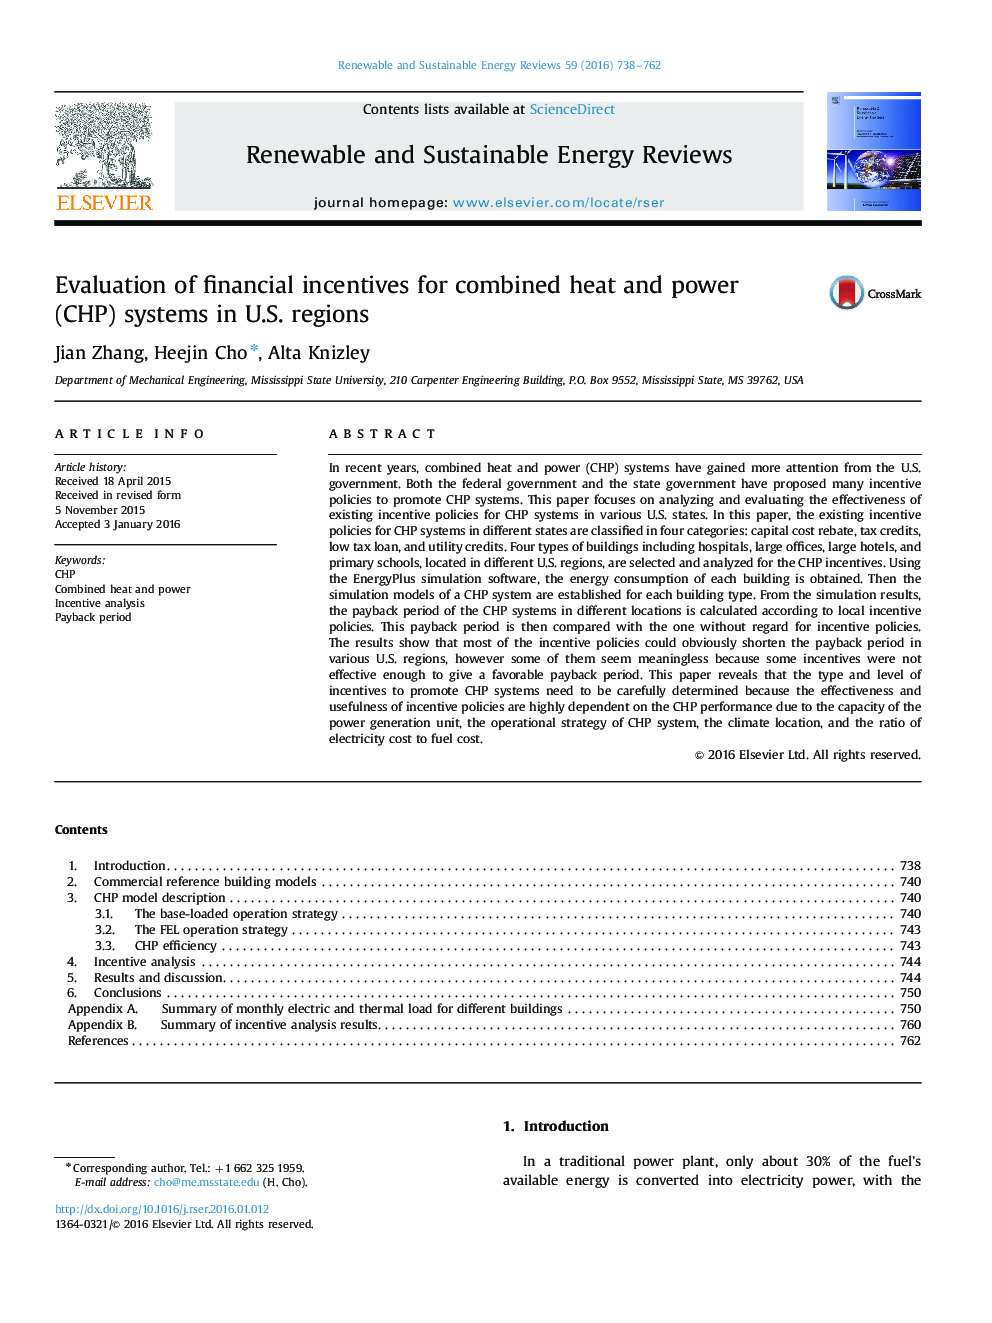 Evaluation of financial incentives for combined heat and power (CHP) systems in U.S. regions